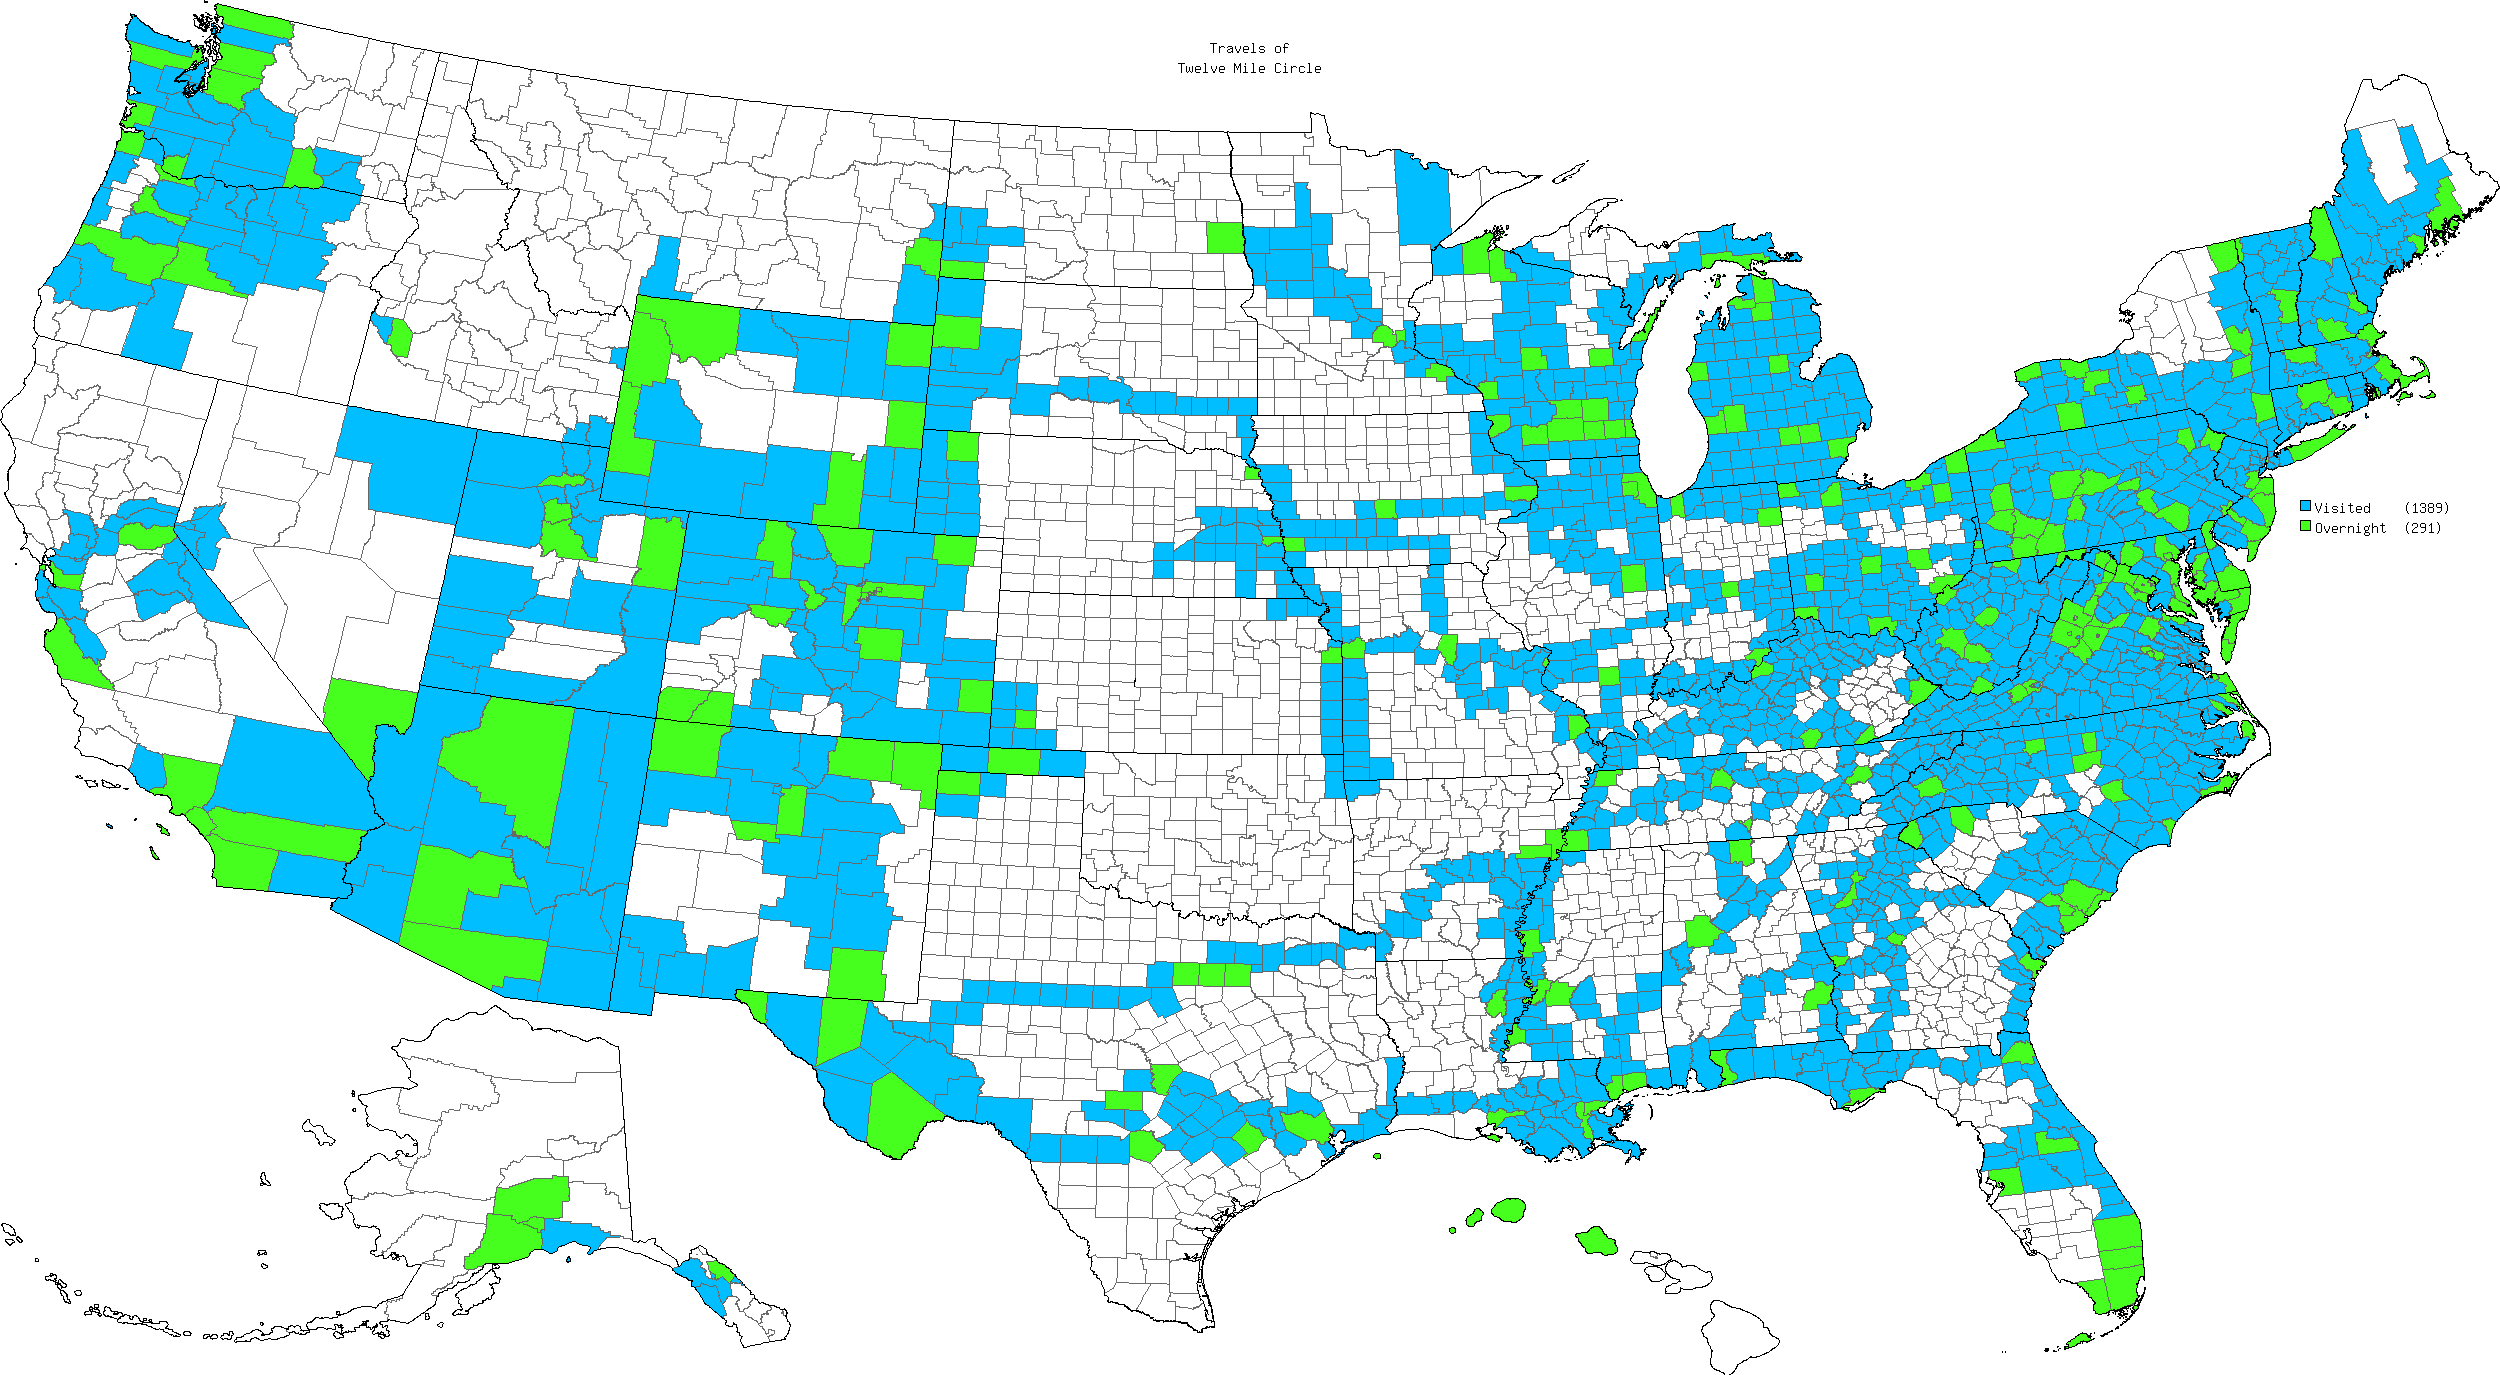 Counties in the United States that I have visited.